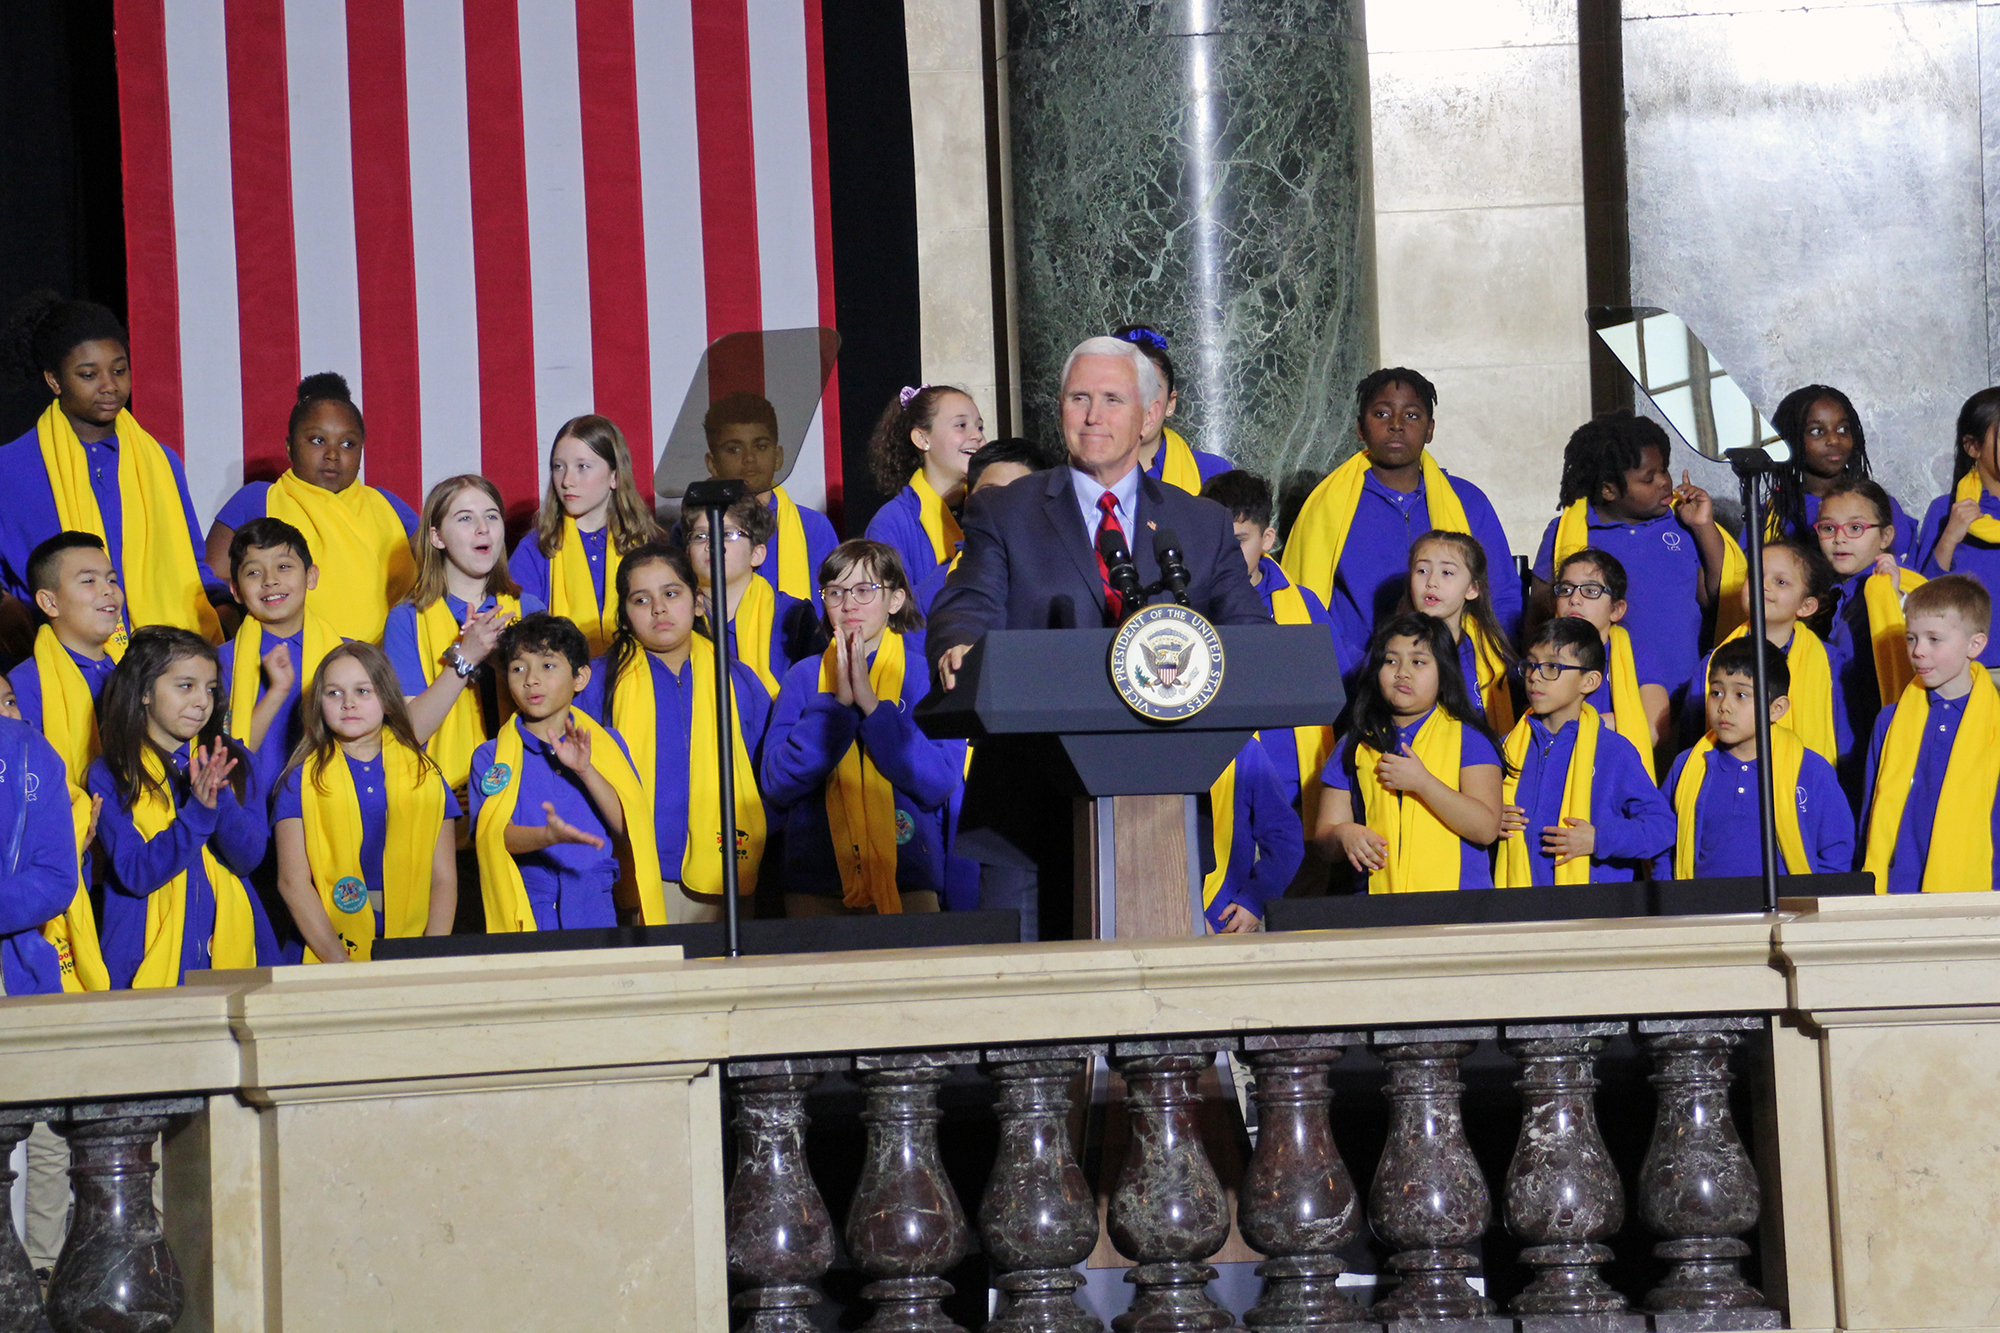 In Visit To Wisconsin Capitol, Vice President Pence Lauds Private School Voucher Programs